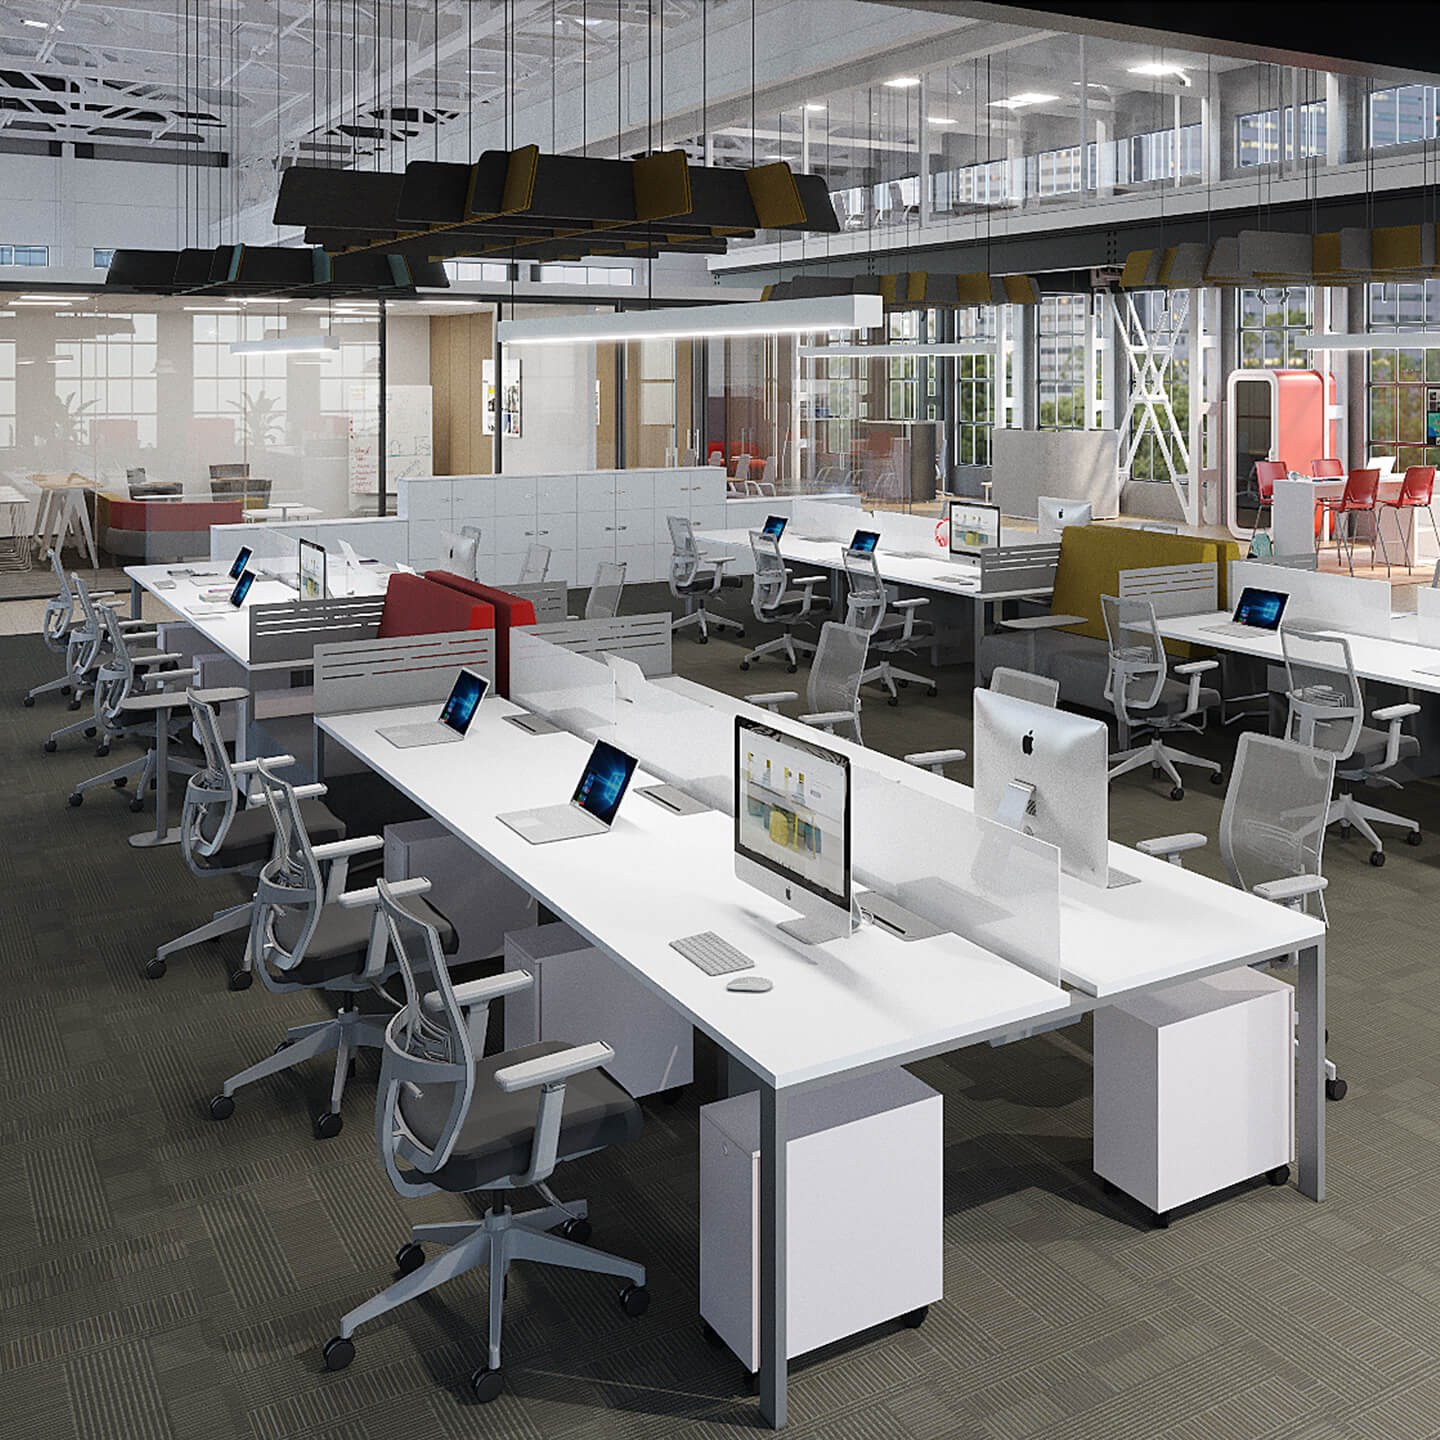 Haworth EZ Workspace partial divider in open office seating with glass windows and chairs